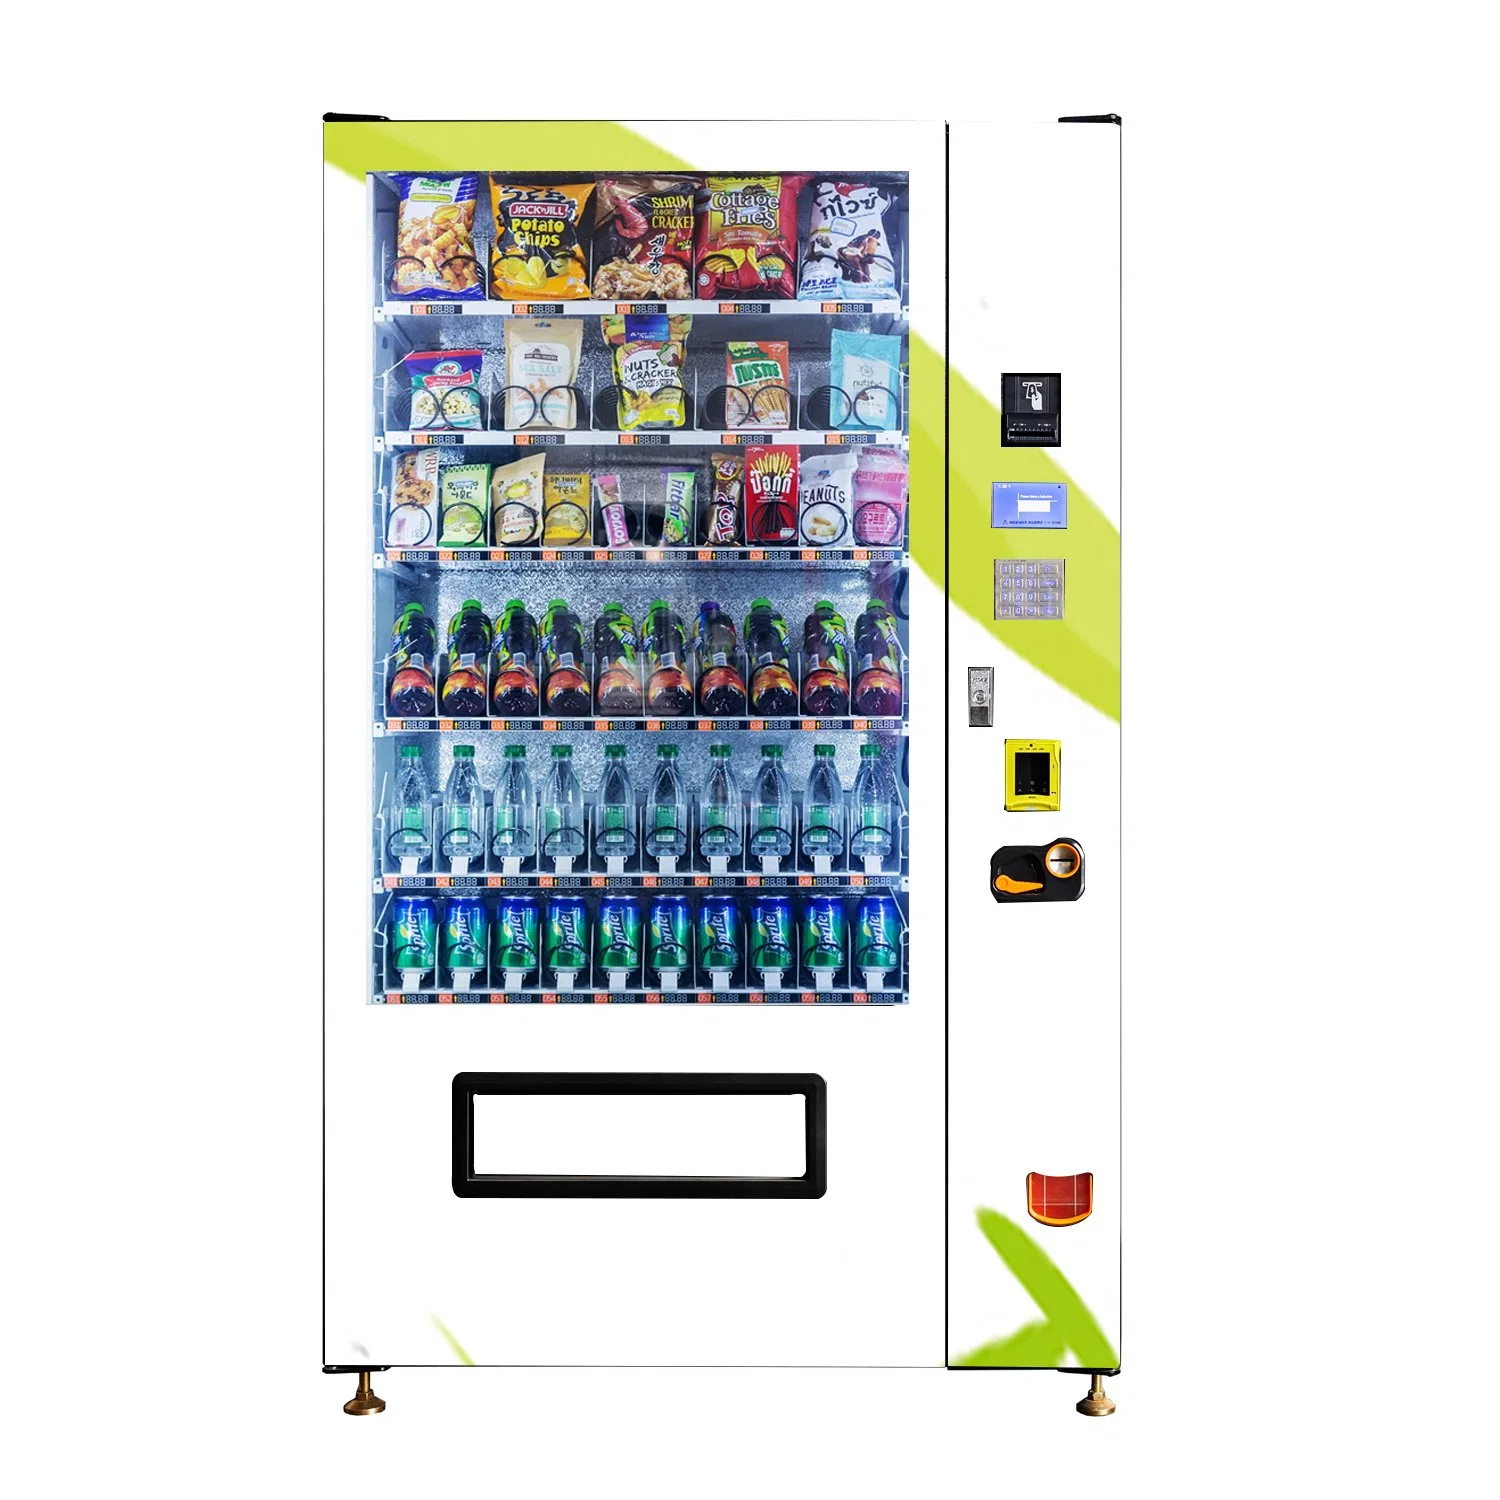 Vending Machine for Cakes, Bread and Beverage Foods with Refrigeration